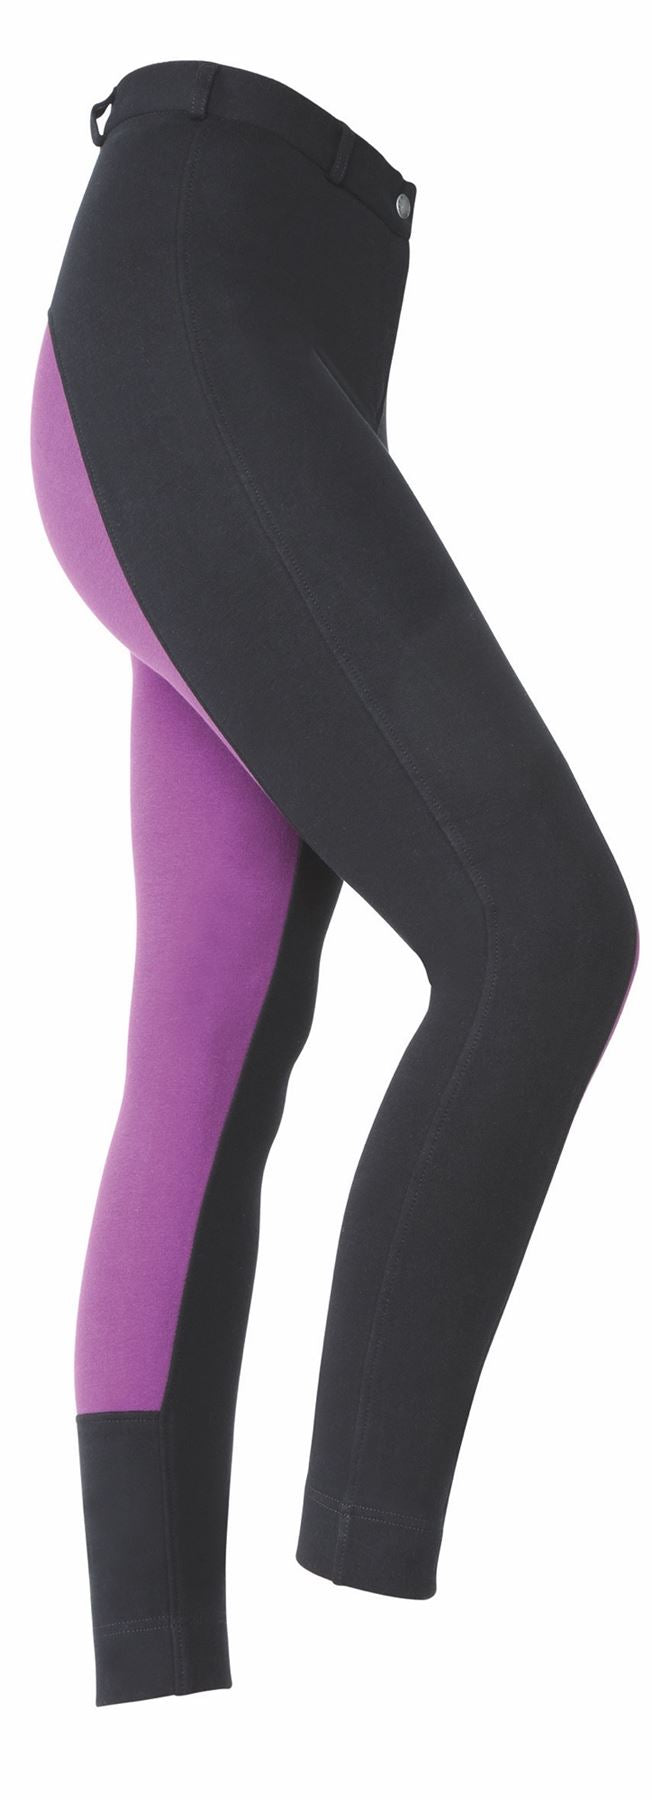 Shires Wessex Two Tone Jodhpurs - Maids - Just Horse Riders